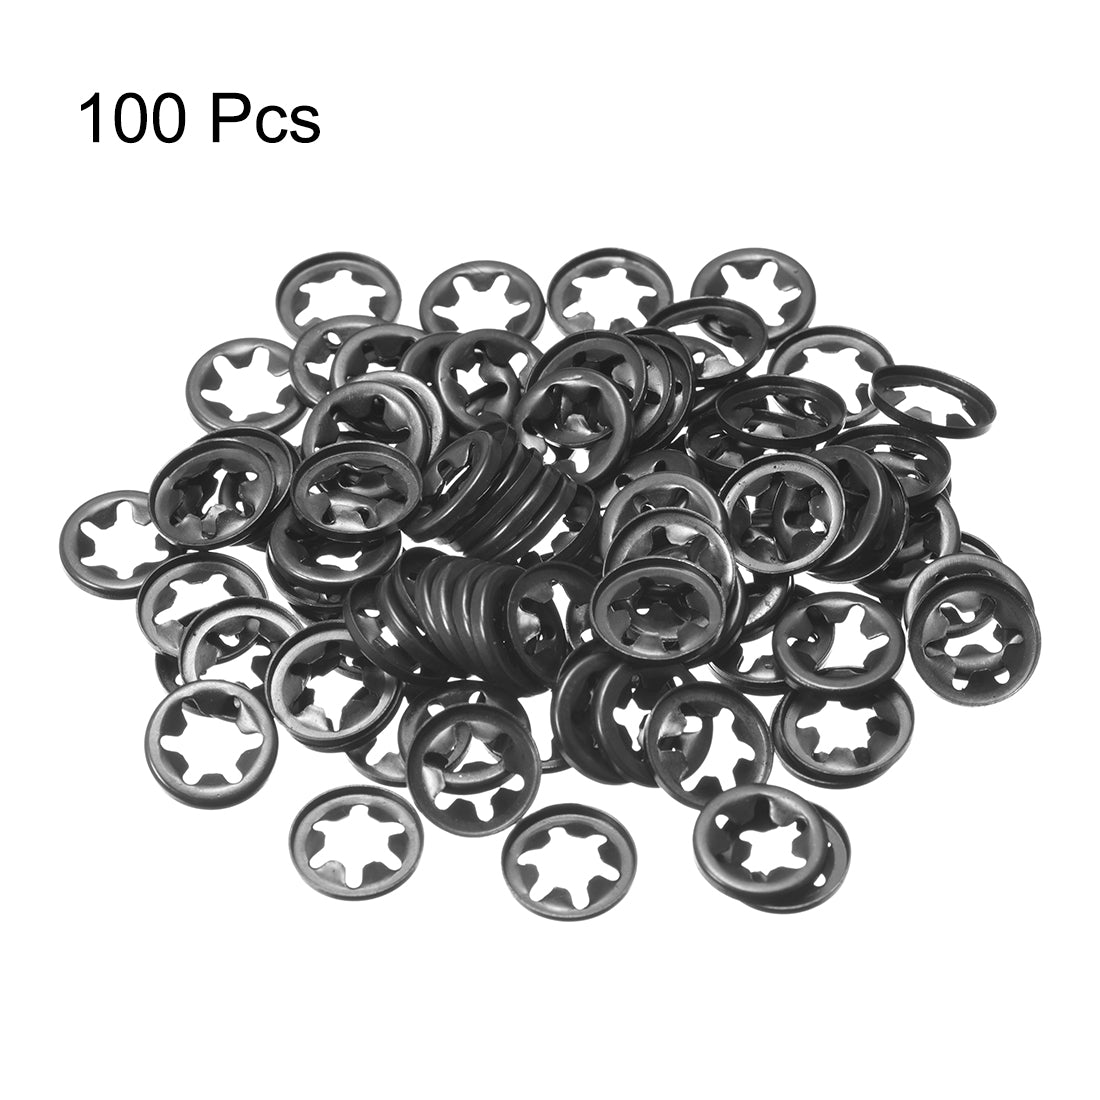 Uxcell Uxcell Star Locking Washers , M4 x12 Internal Tooth Push On Locking Washers Clips 5 Points Fasteners Assortment Kit 100pcs